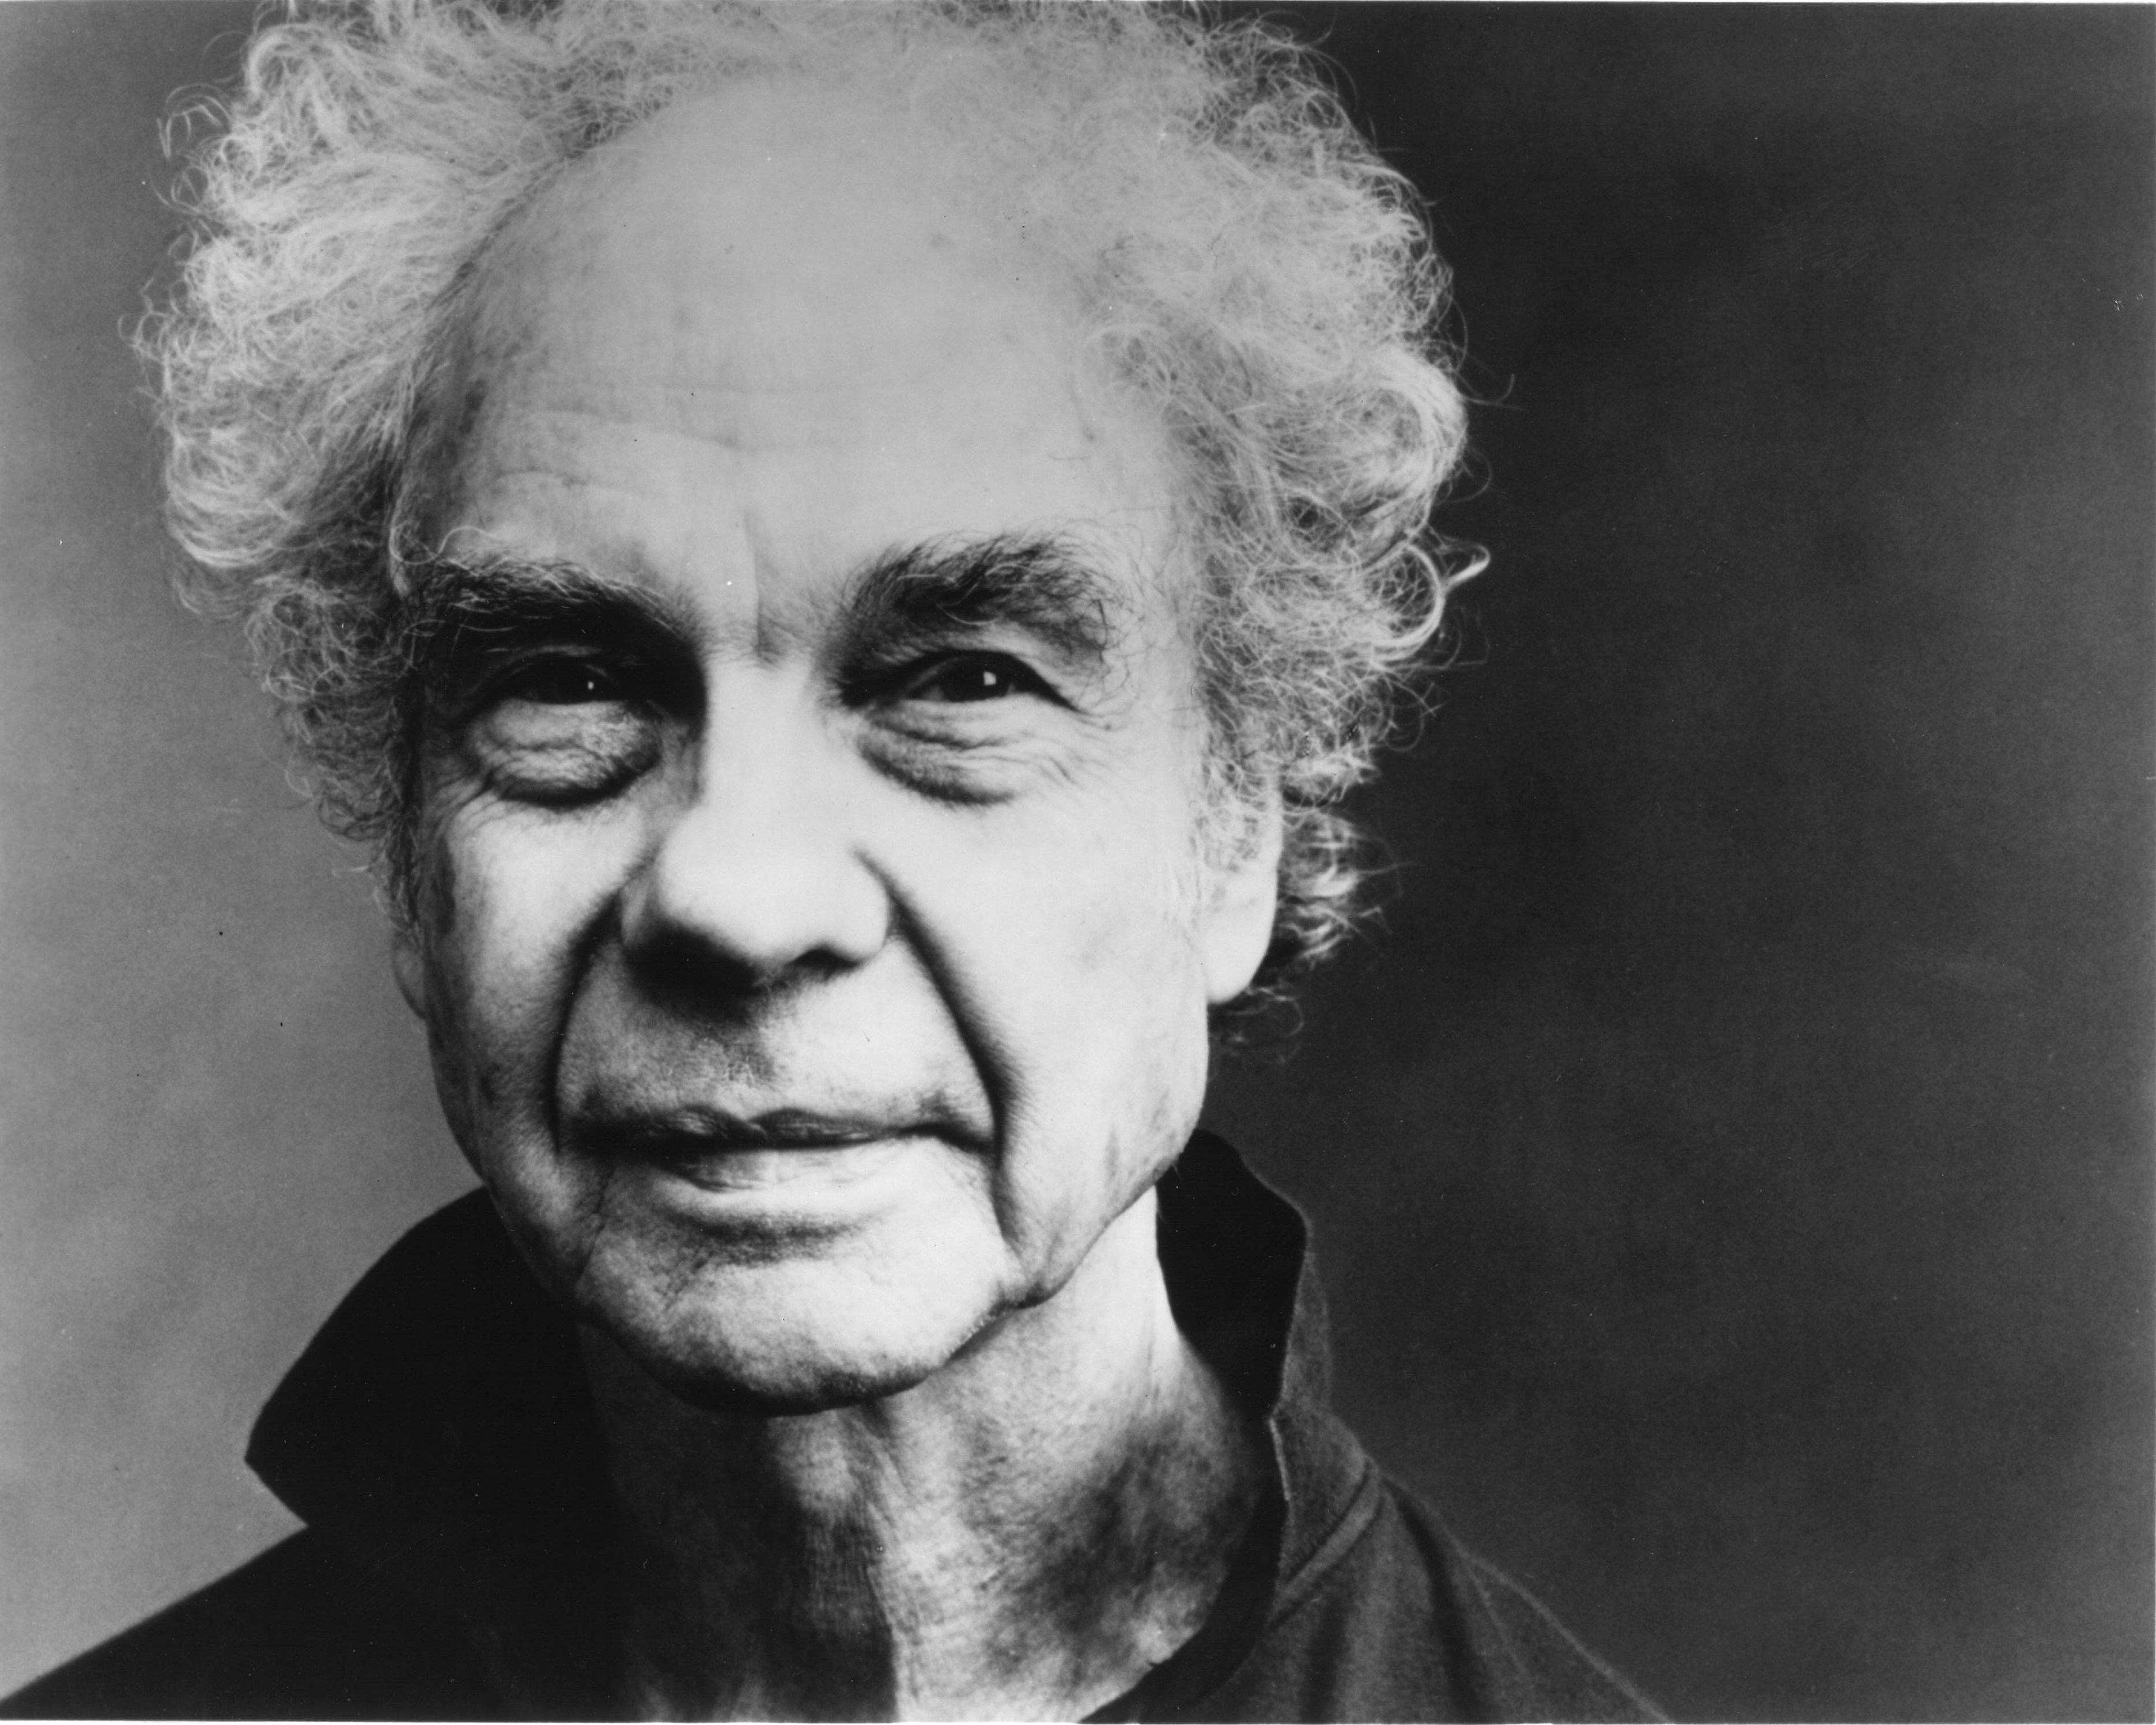 A portrait of Merce Cunningham later in his life.